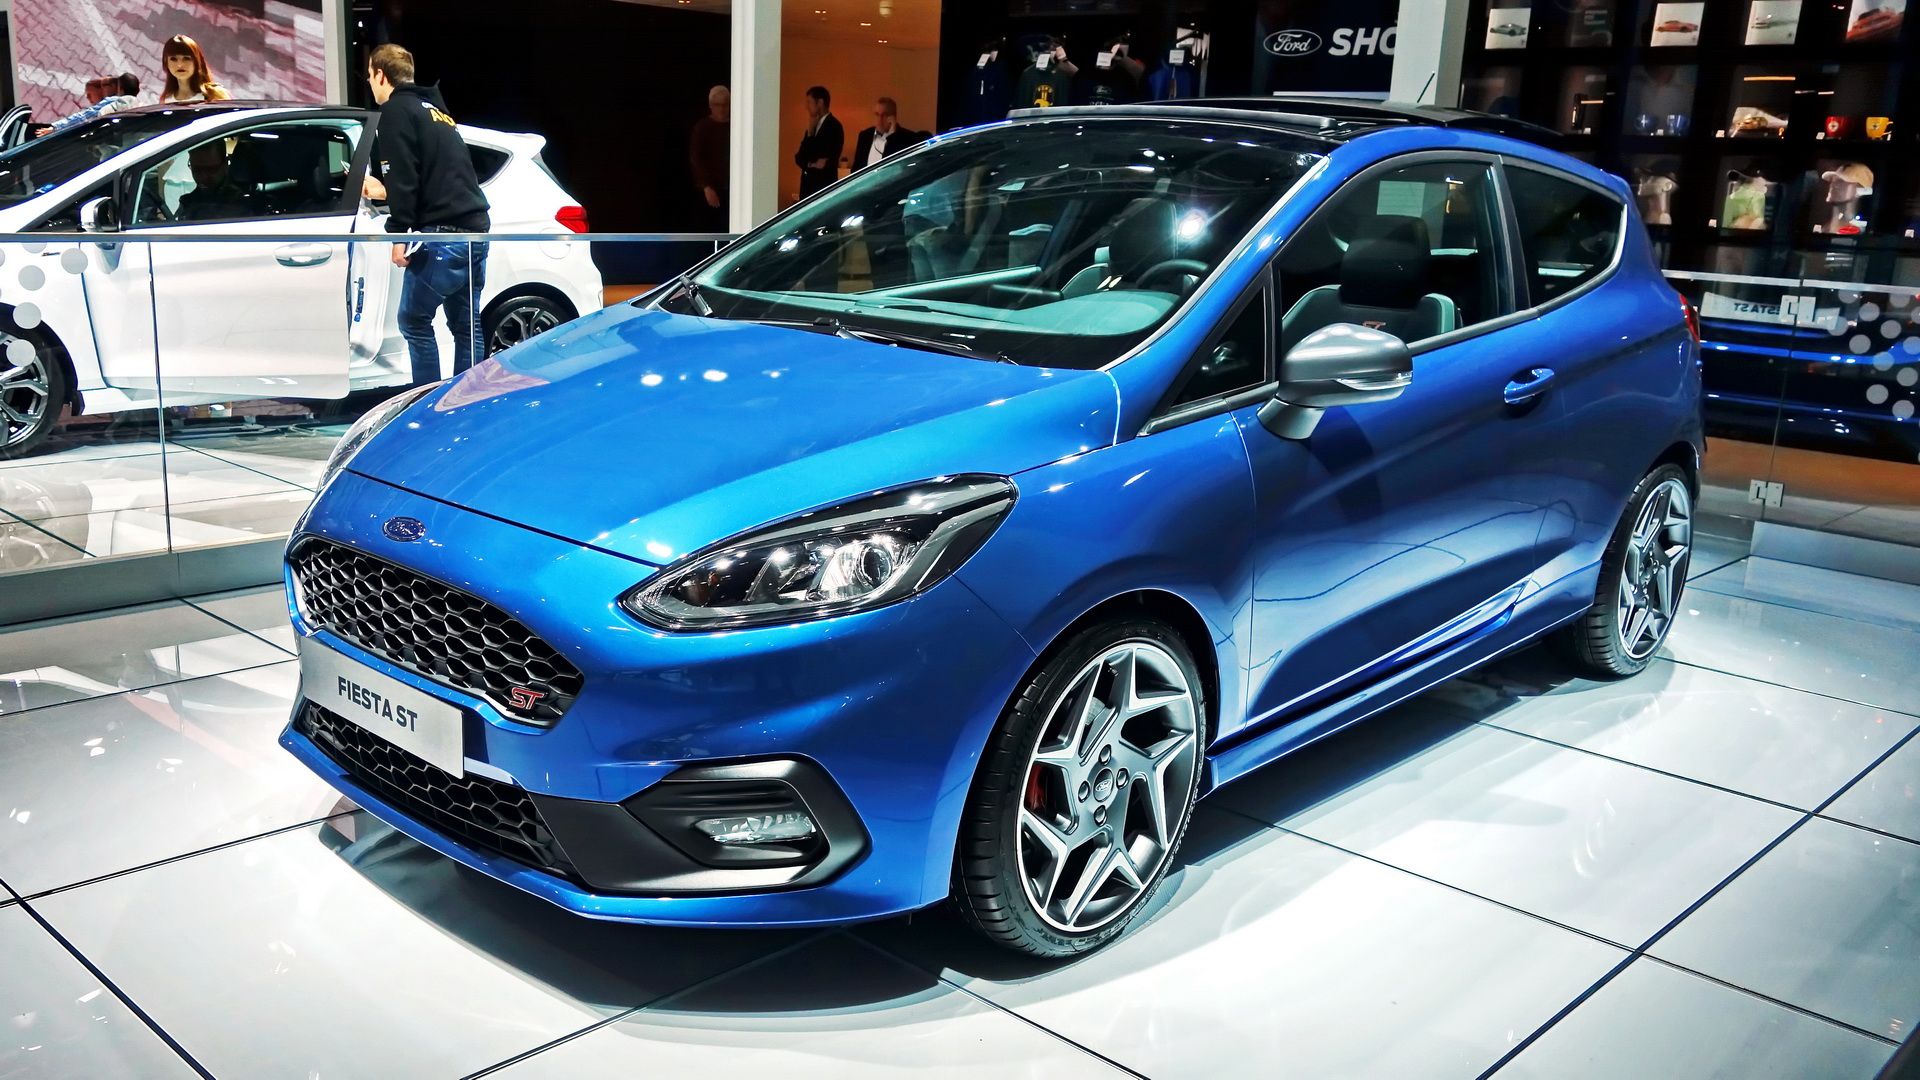 The 2018 Ford Fiesta